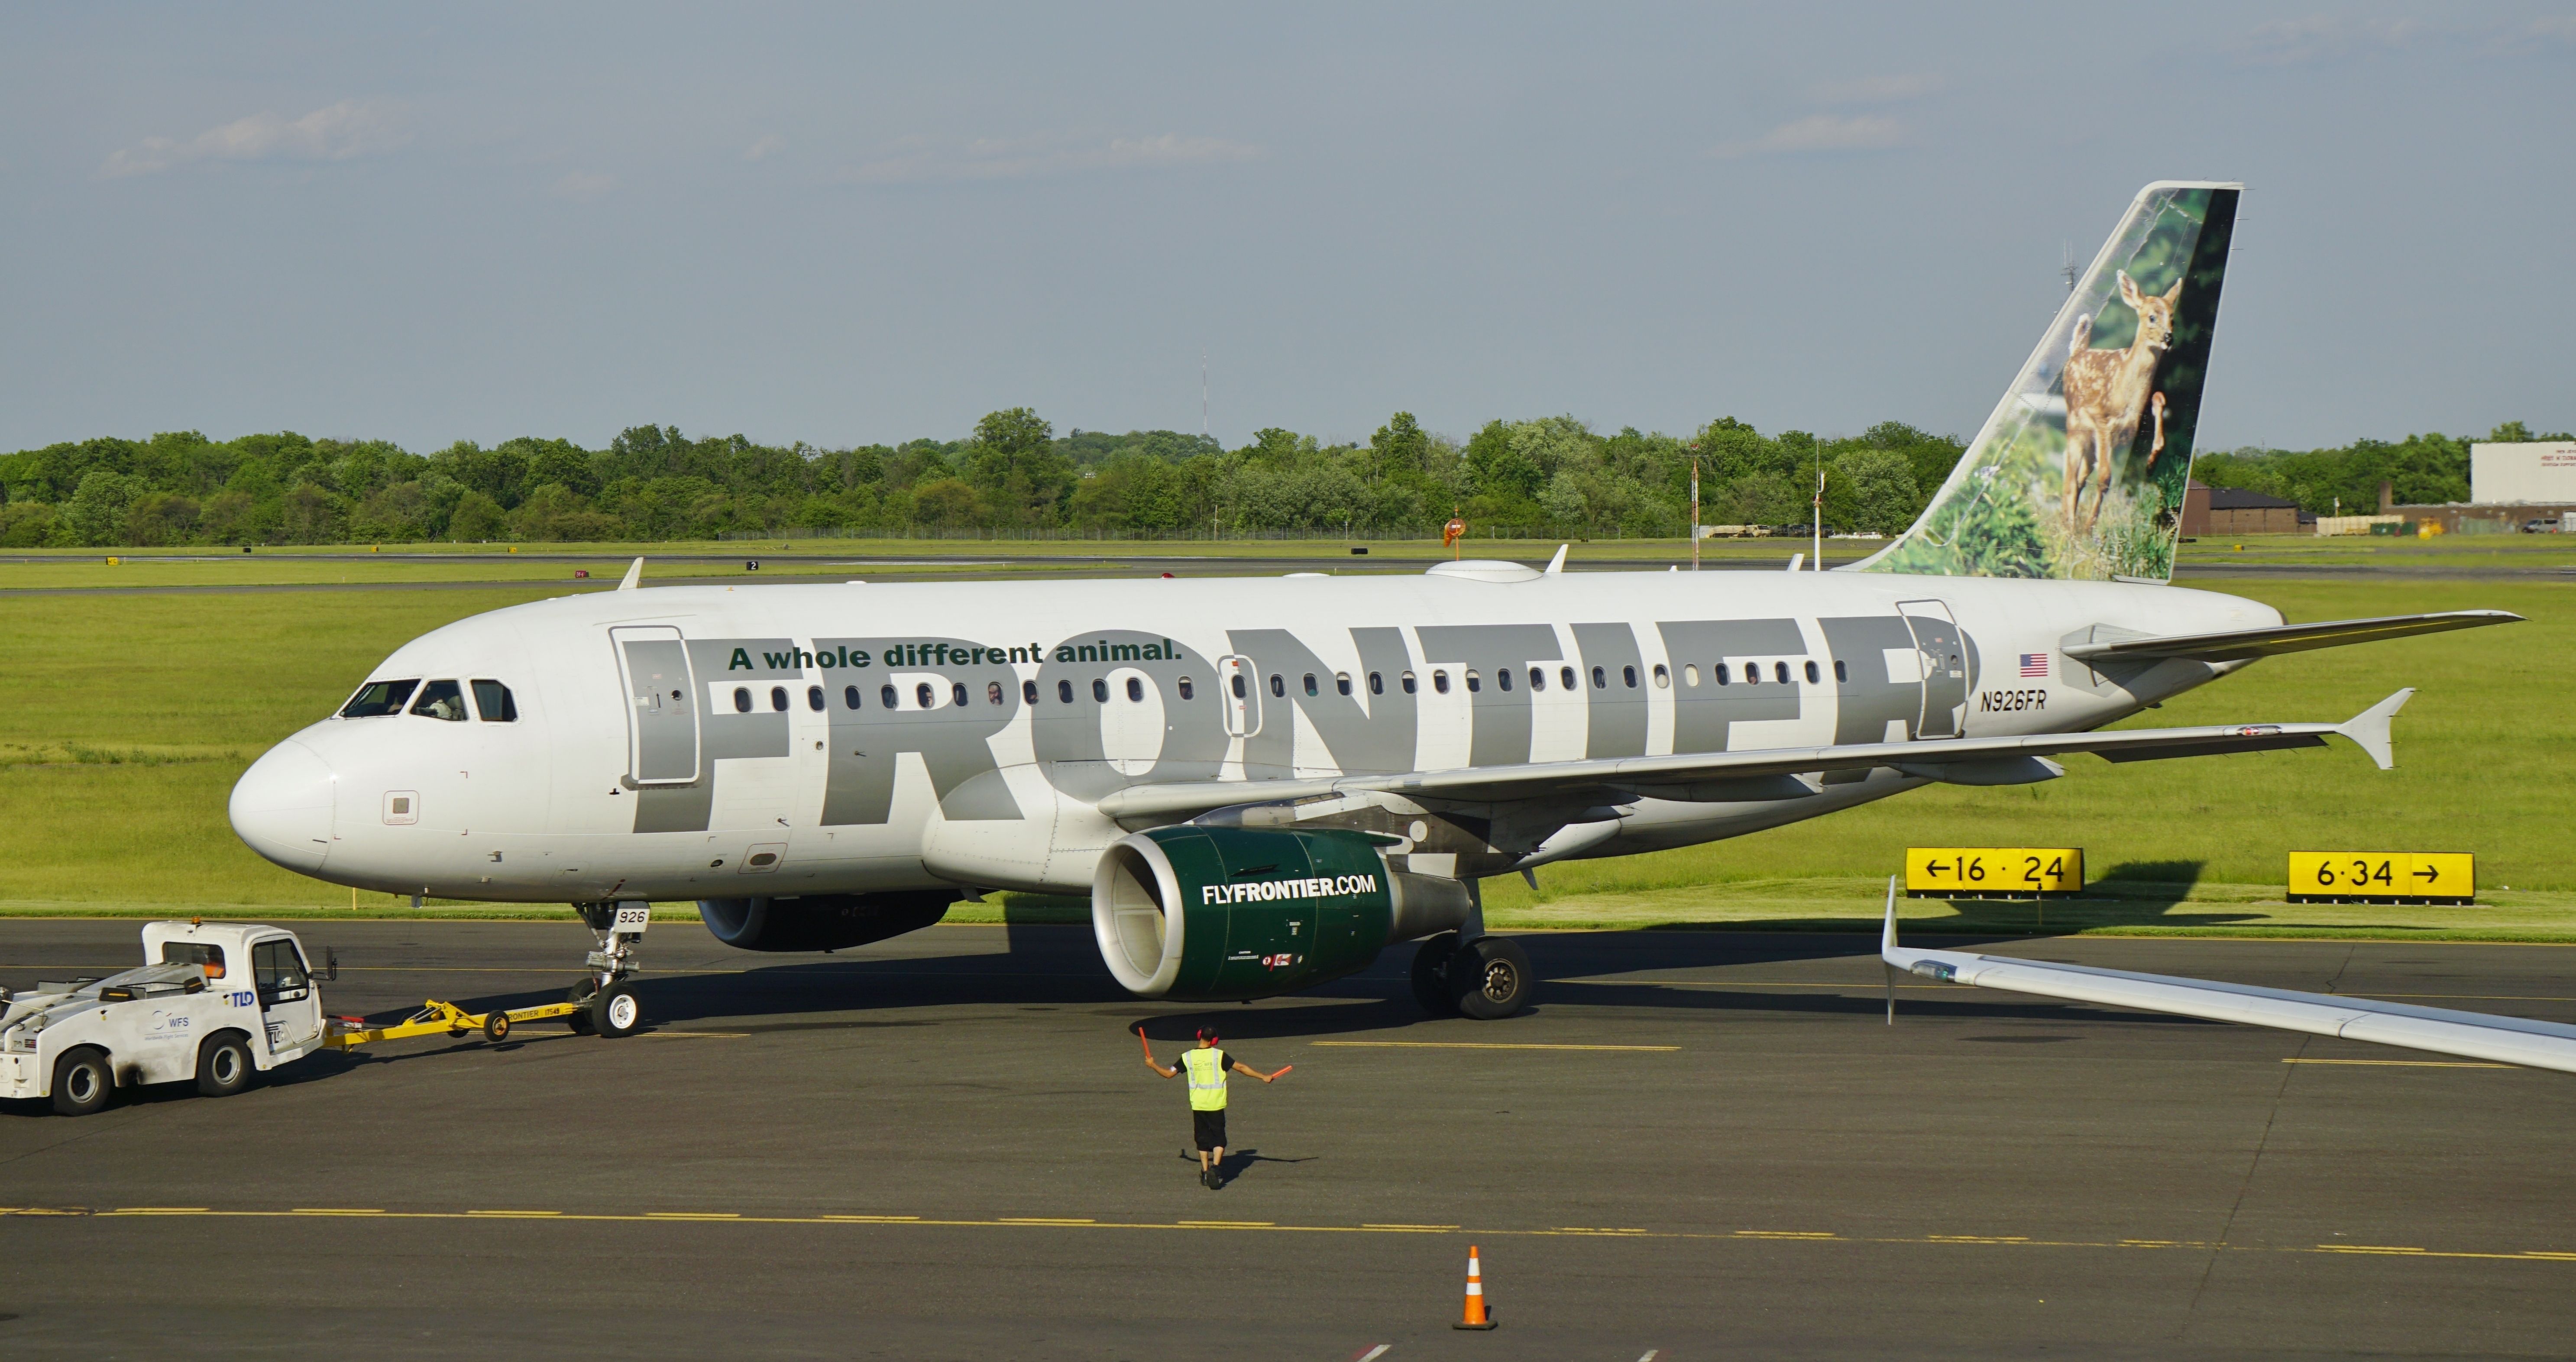 An old Frontier Airlines aircraft on an airport apron.